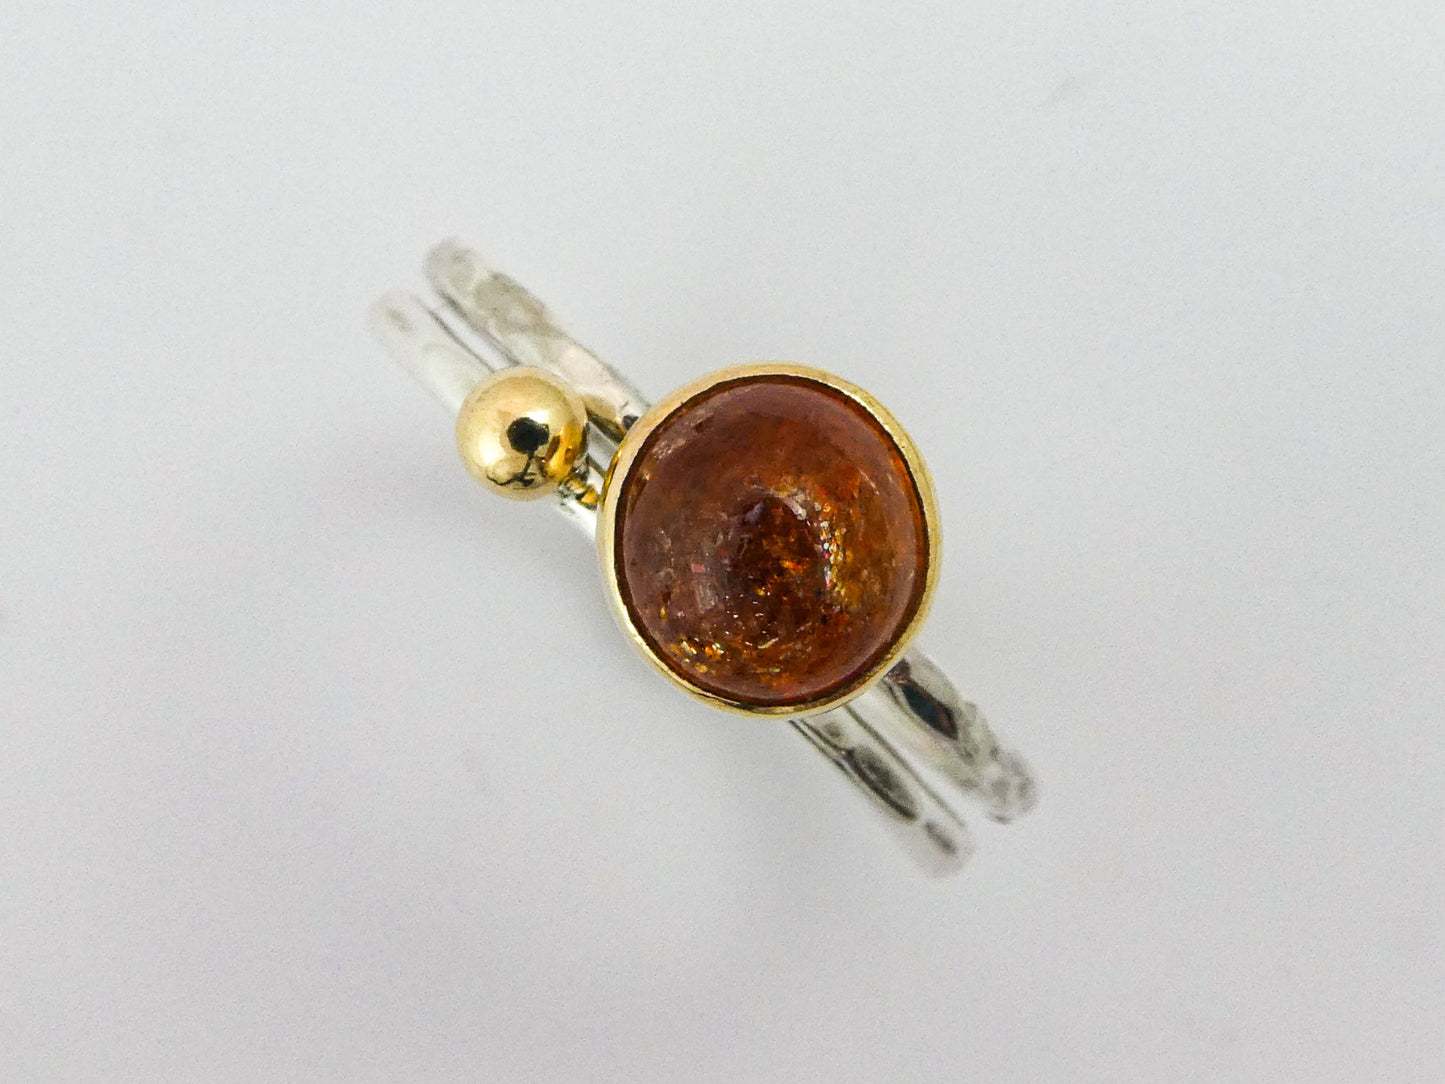 Golden Sunstone Gemstone in a 14k Yellow Gold Bezel on a Slim Silver Stacking Ring Set of 2, Size 5.5